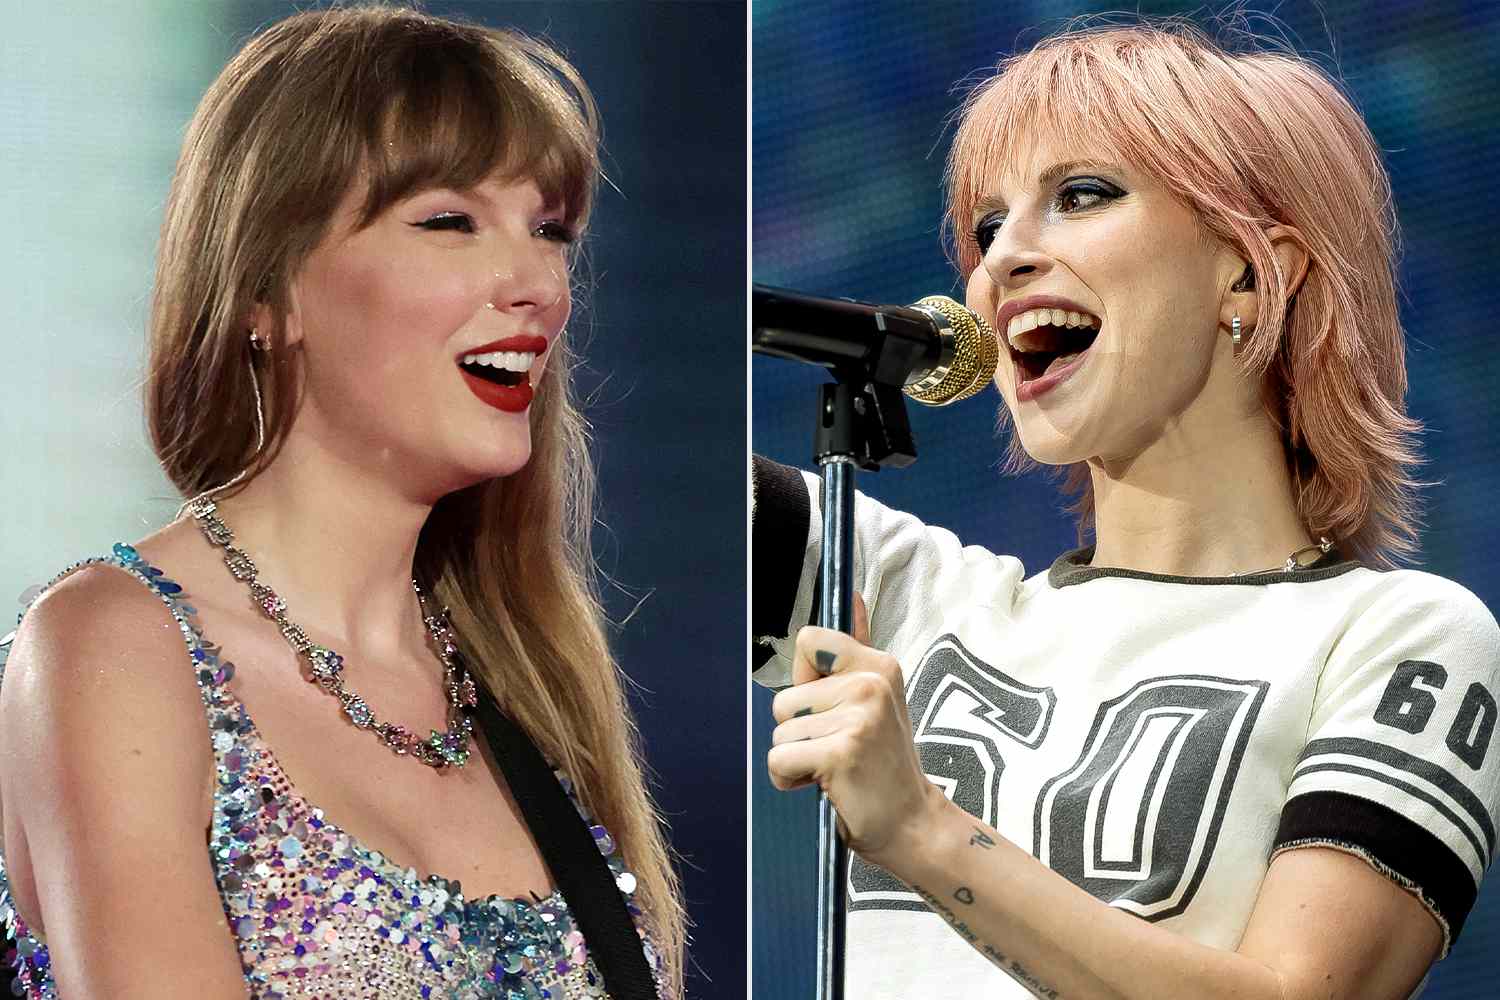 Taylor Swift Brings Out Paramore’s Hayley Williams for Surprise Duet at Second Eras Tour Show in London